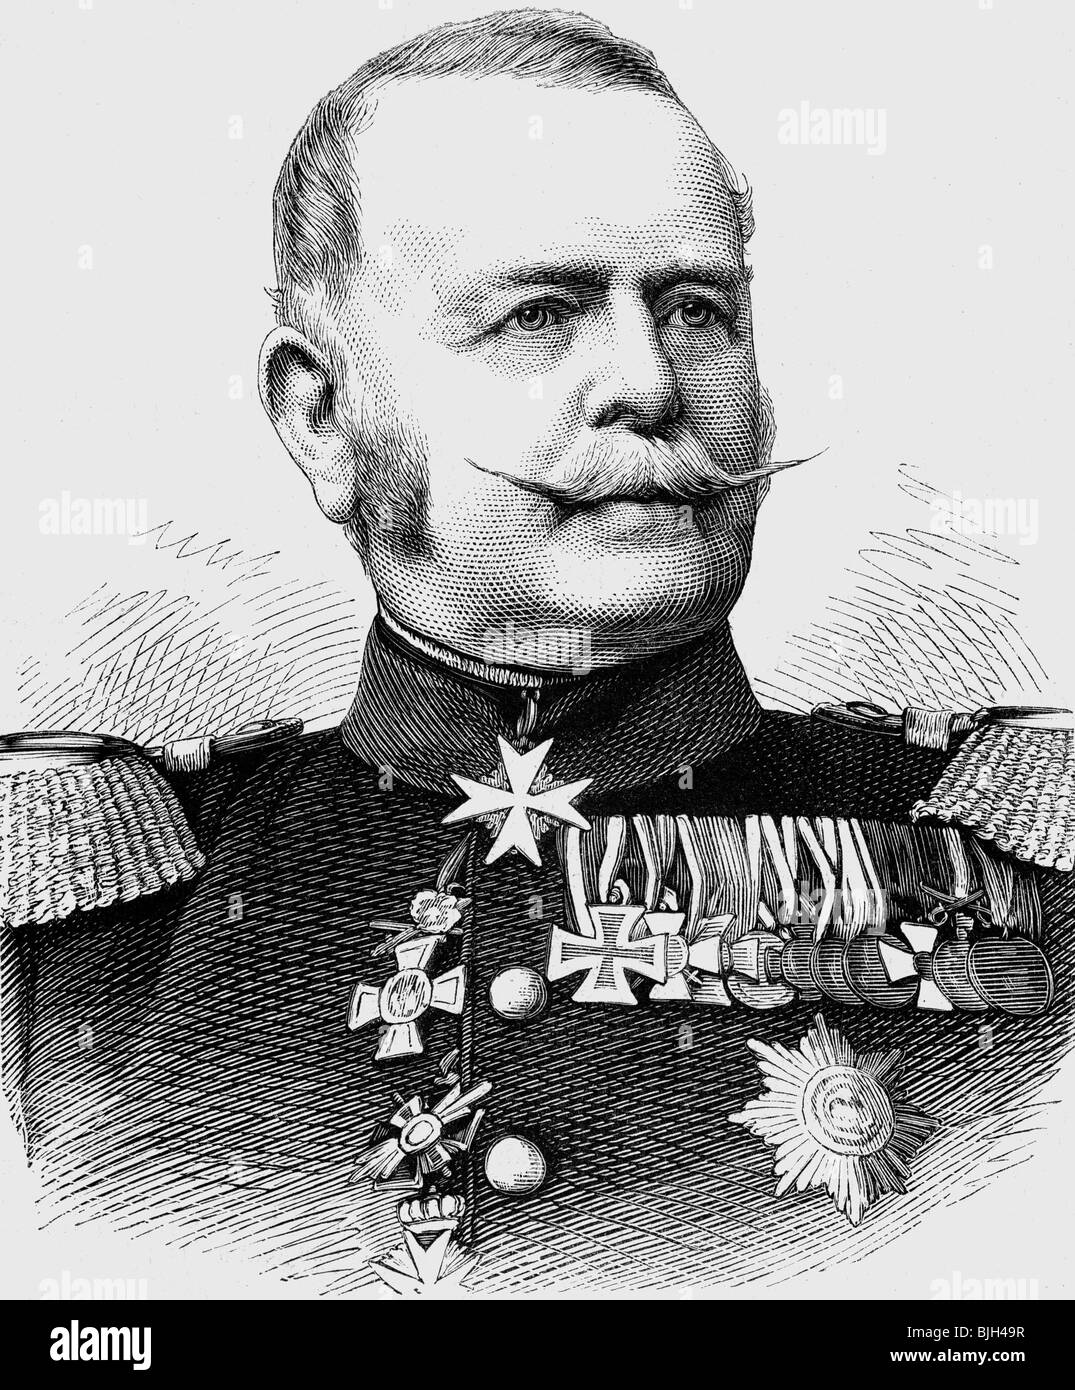 Schwartzkoppen, Emil von, 15.1.1810 - 5.1.1878, Prussian general, commanding general of XIII Army Corps 1873 - 1878, portrait, wood engraving, 1874, , Stock Photo